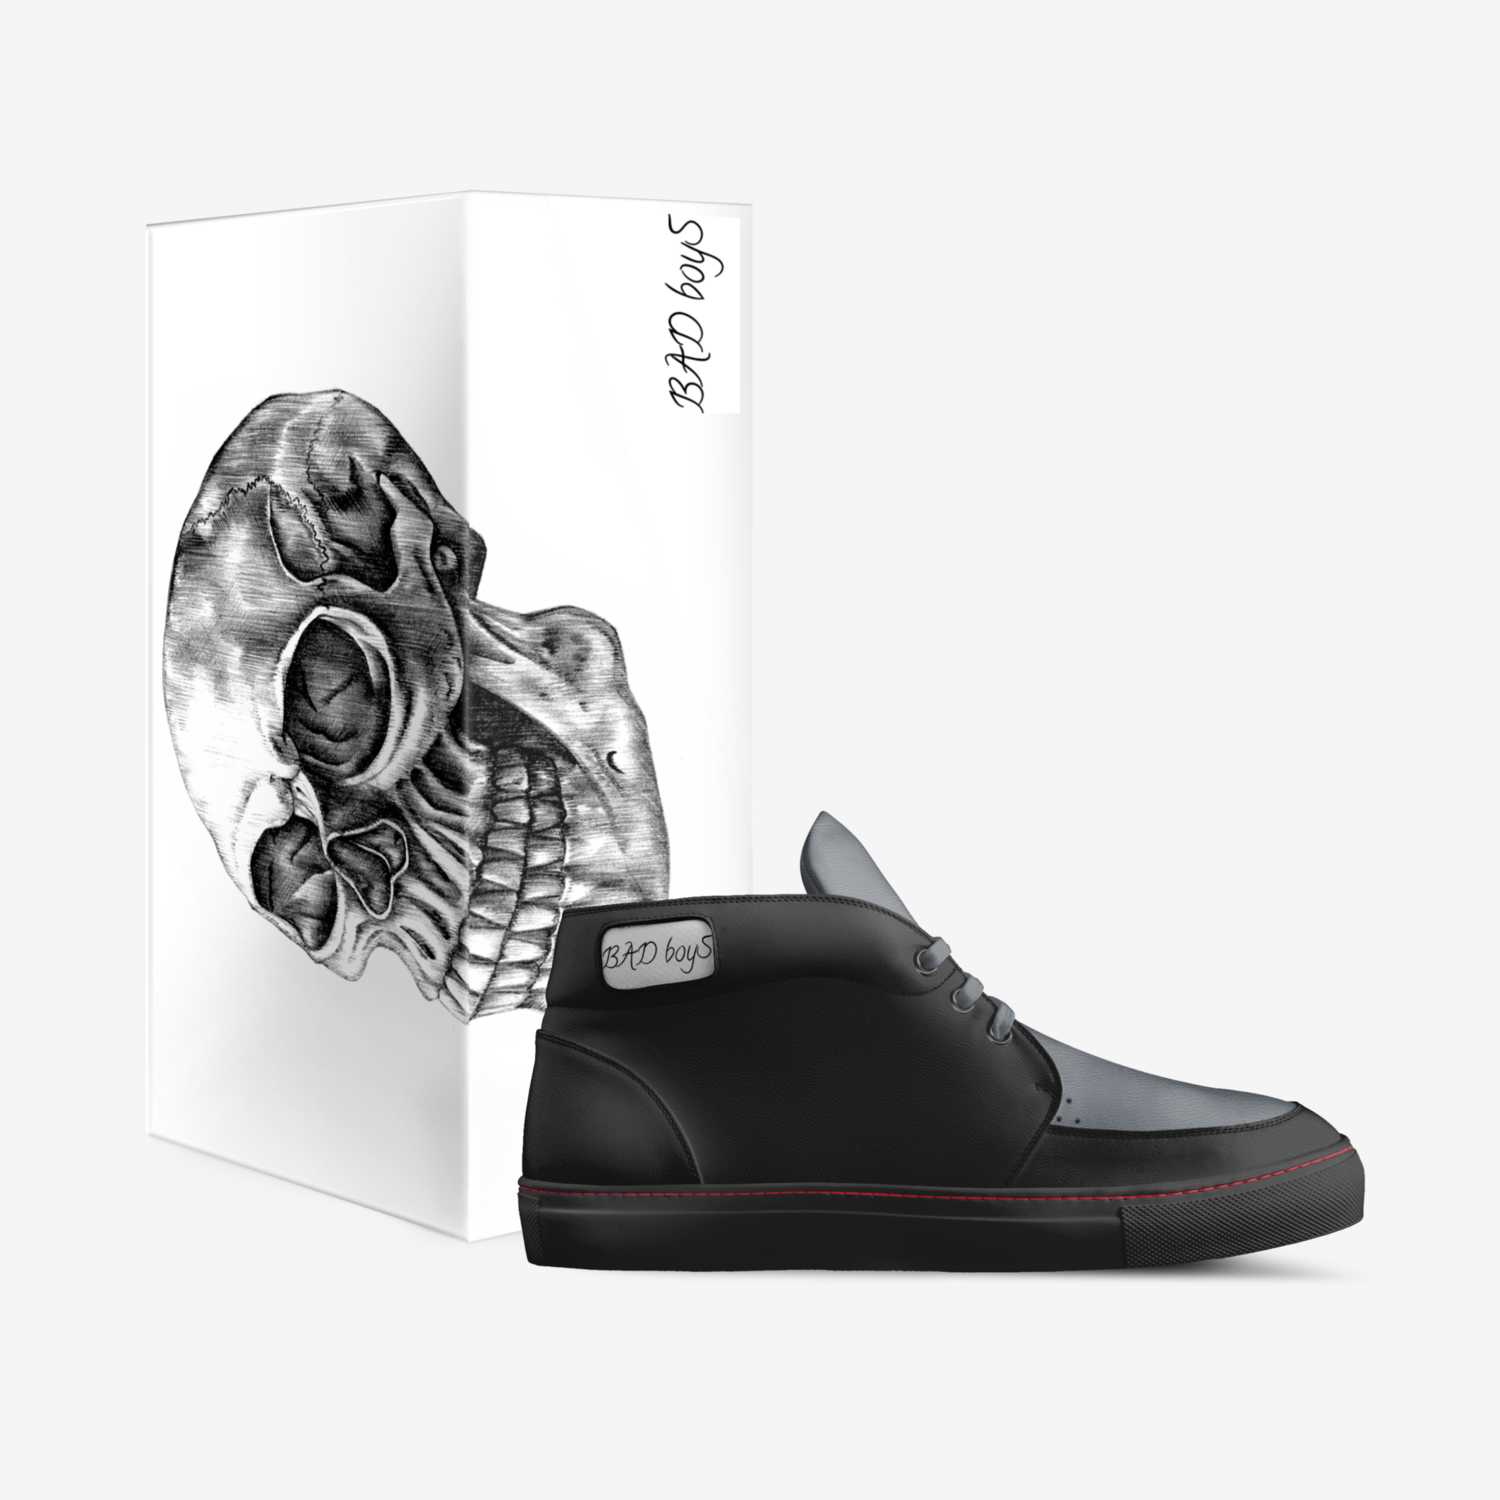 BAD boyS custom made in Italy shoes by Omar Khalaf | Box view